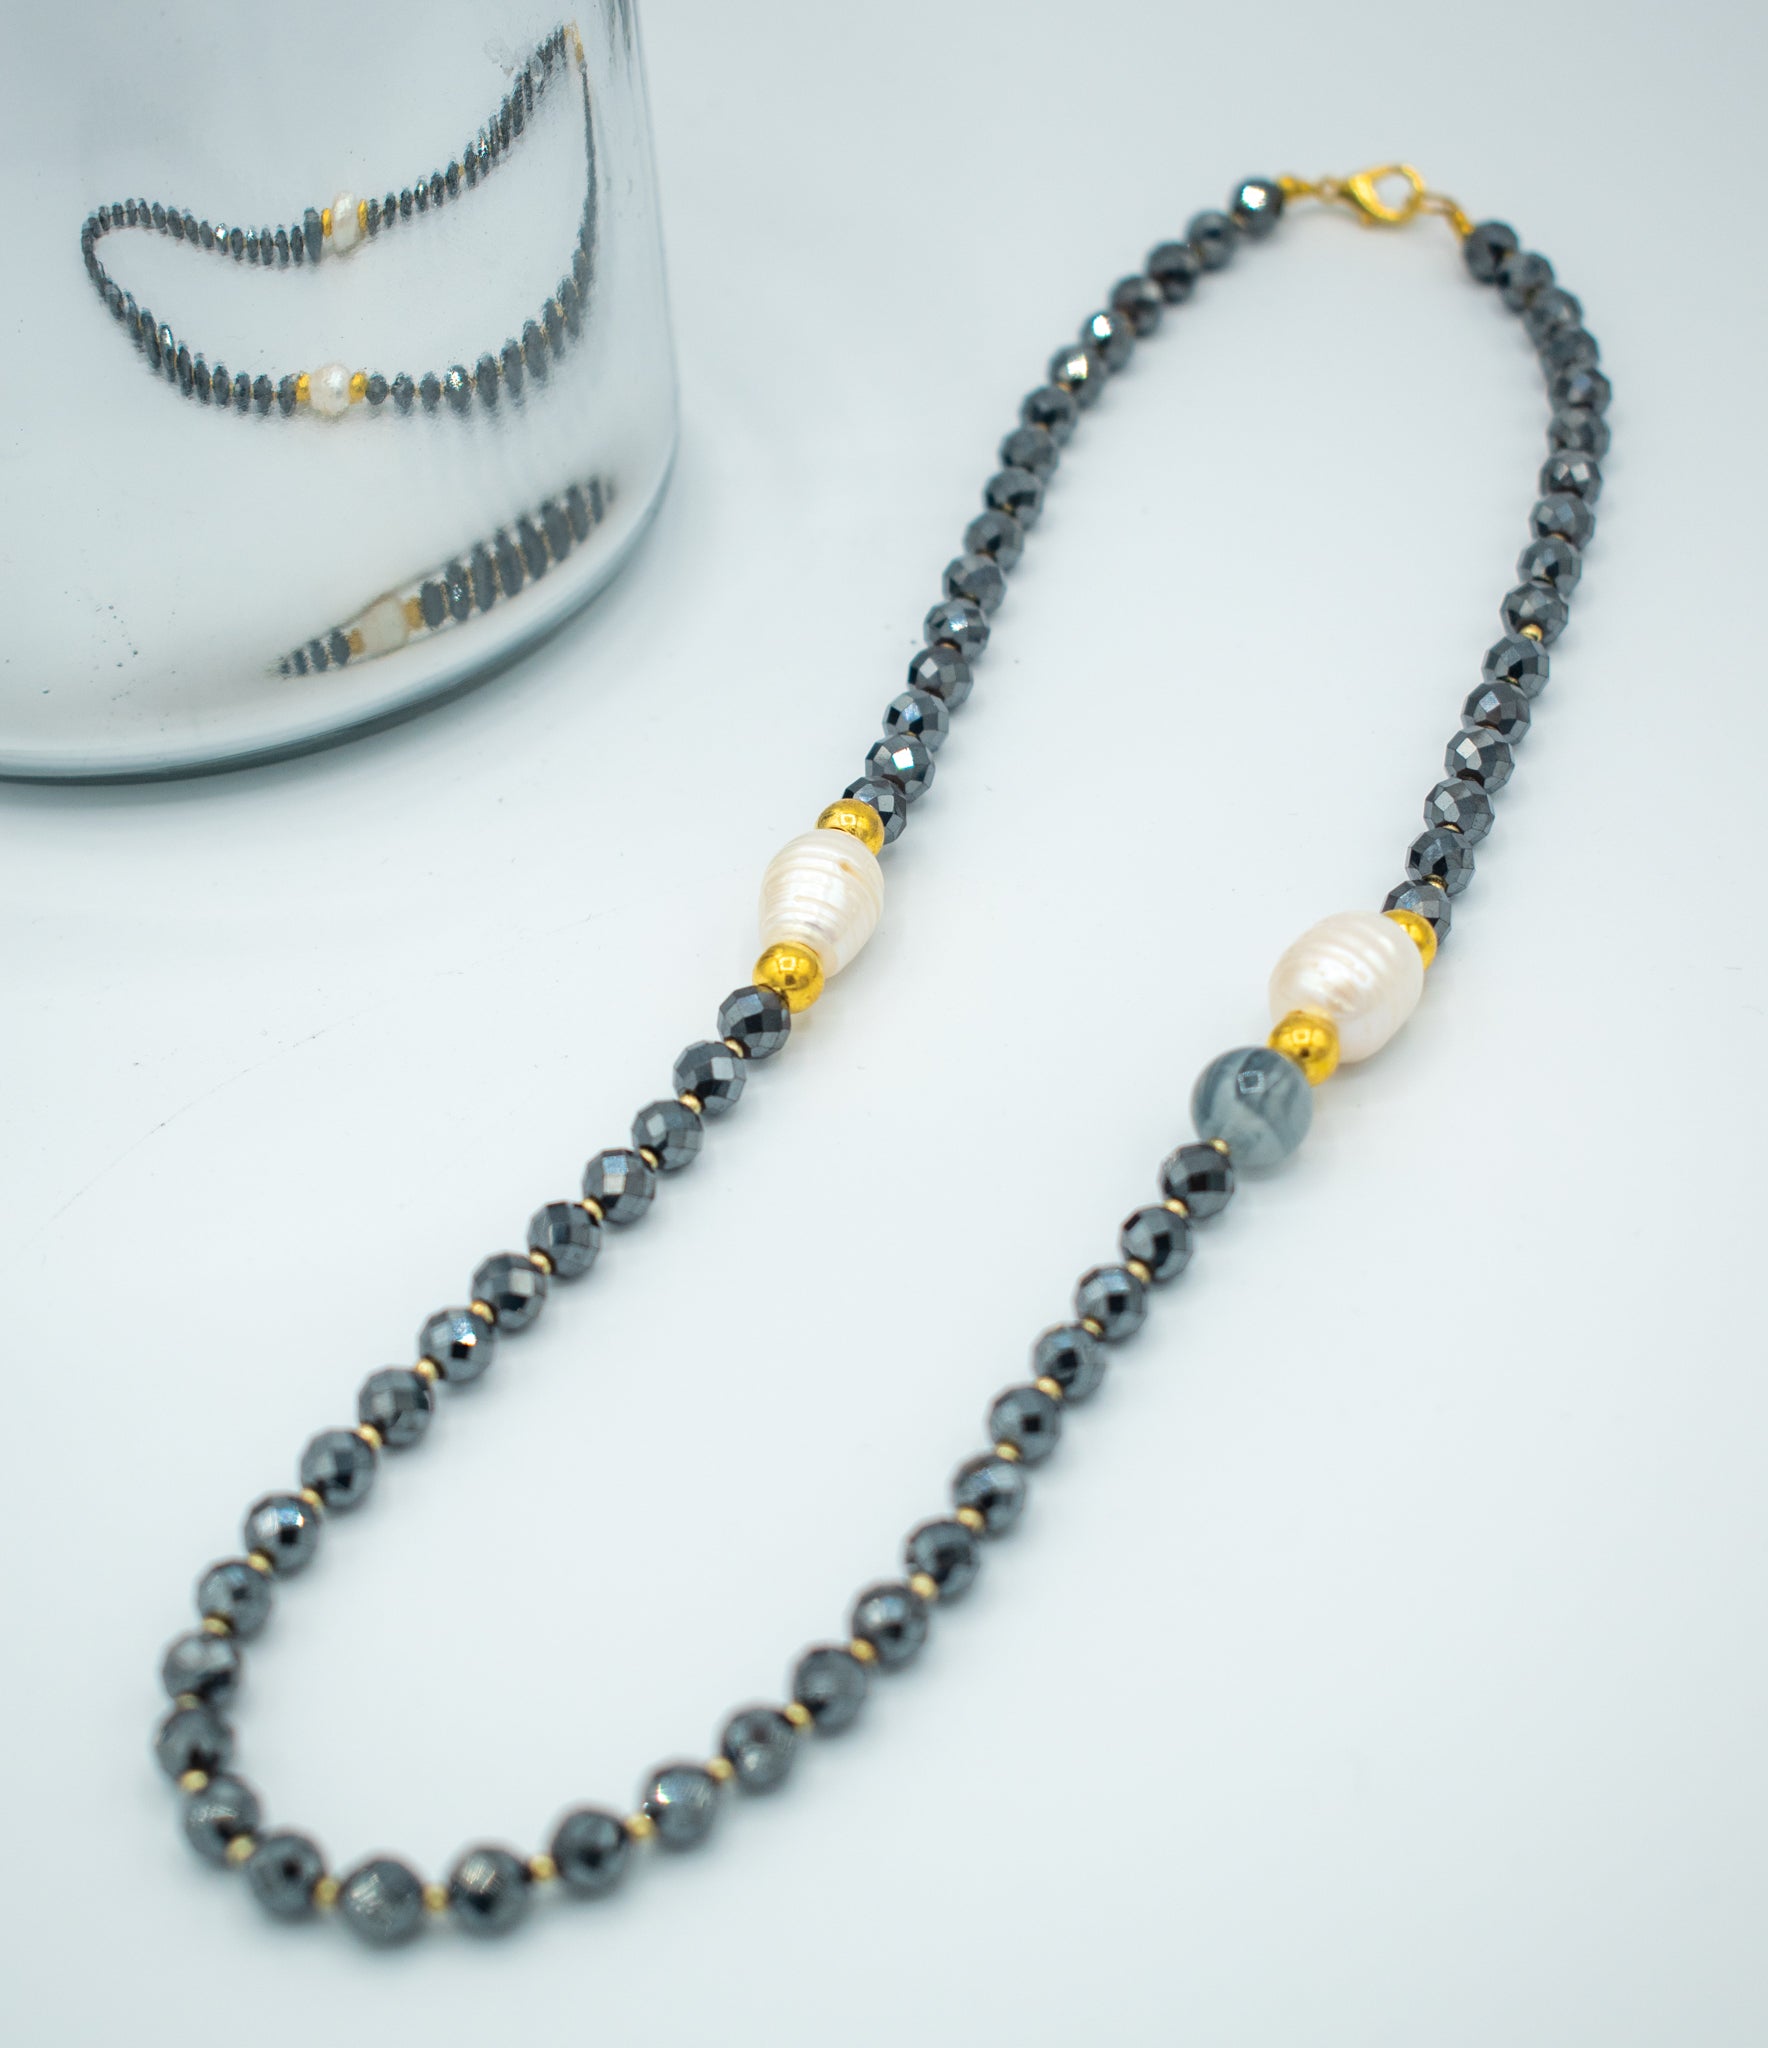 Emanuel Health Black Beads With A Touch Of Blue And White Necklace